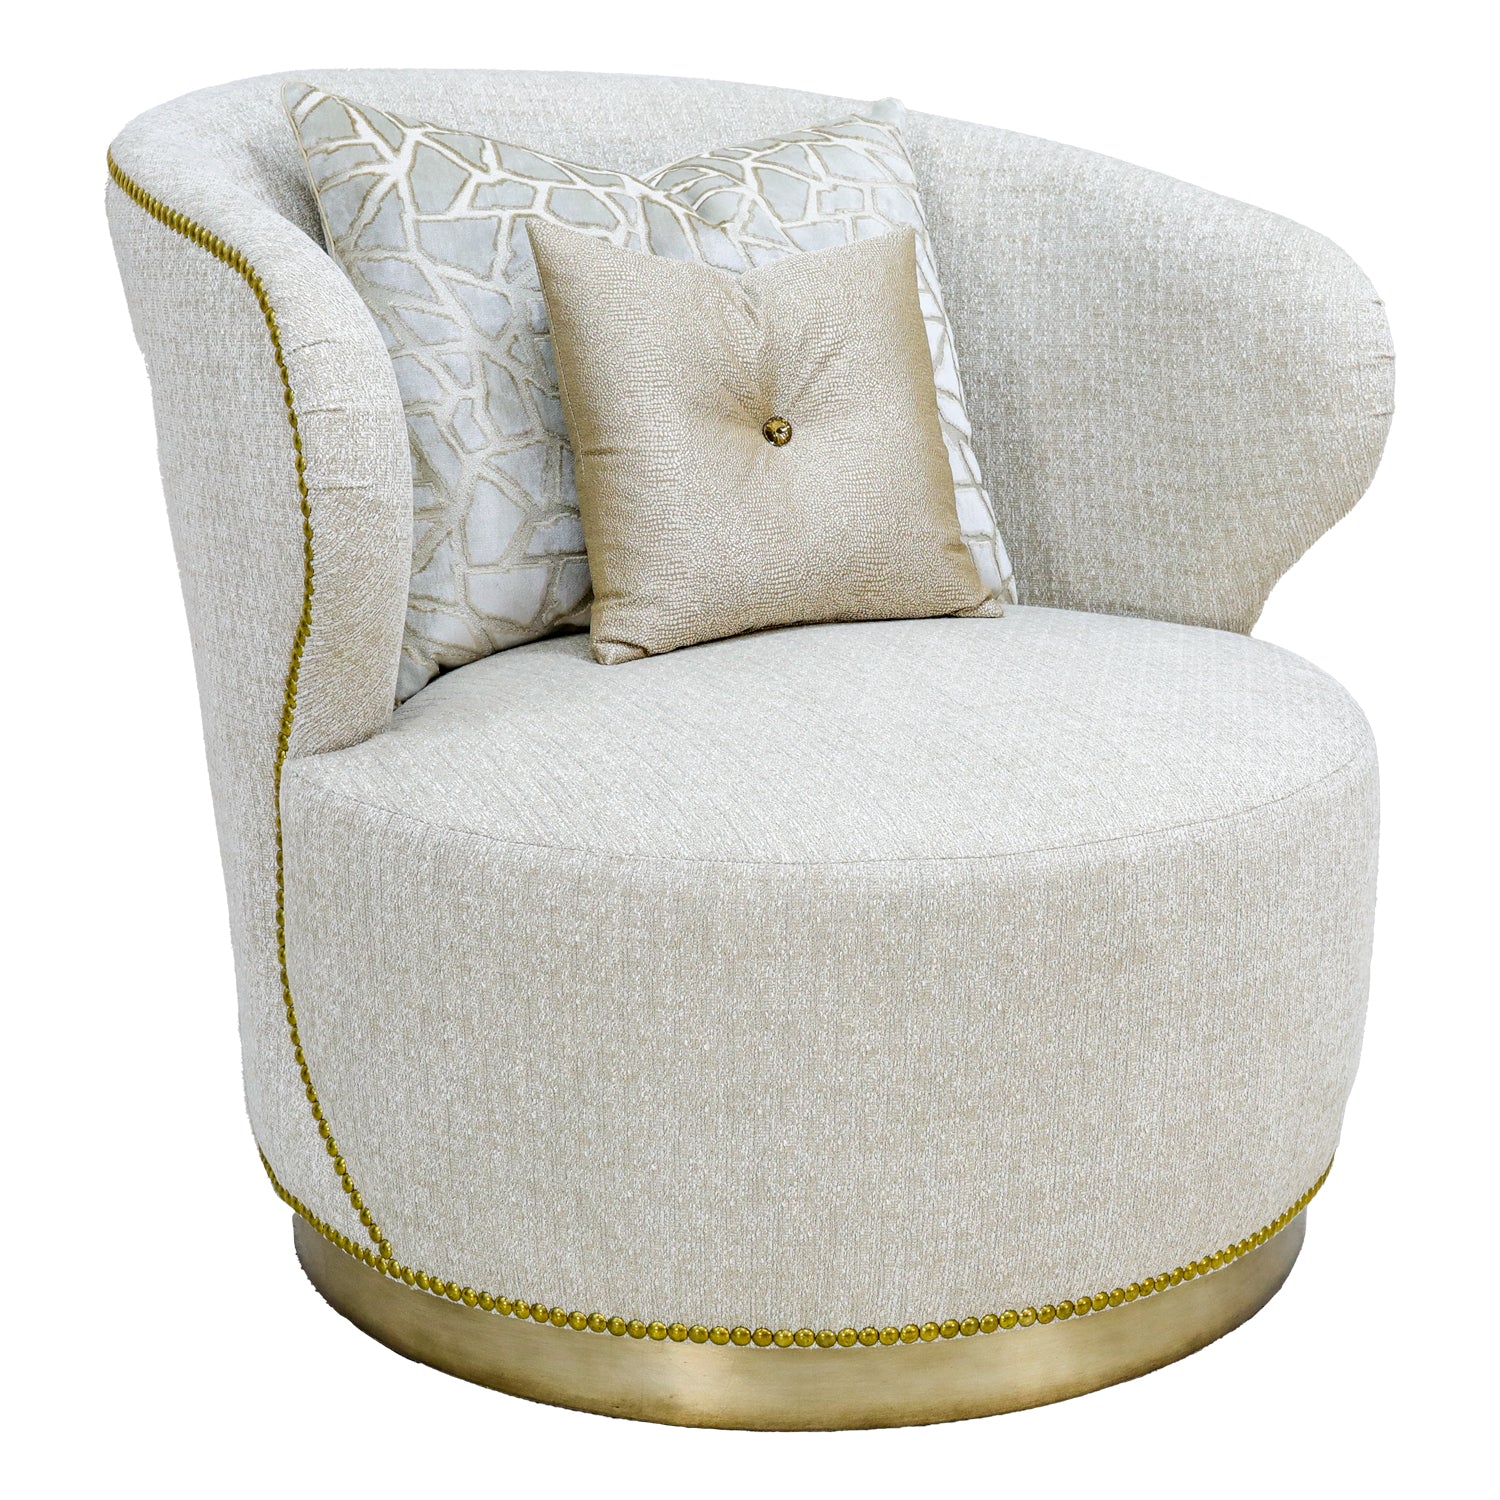 a white chair with a gold trim around it